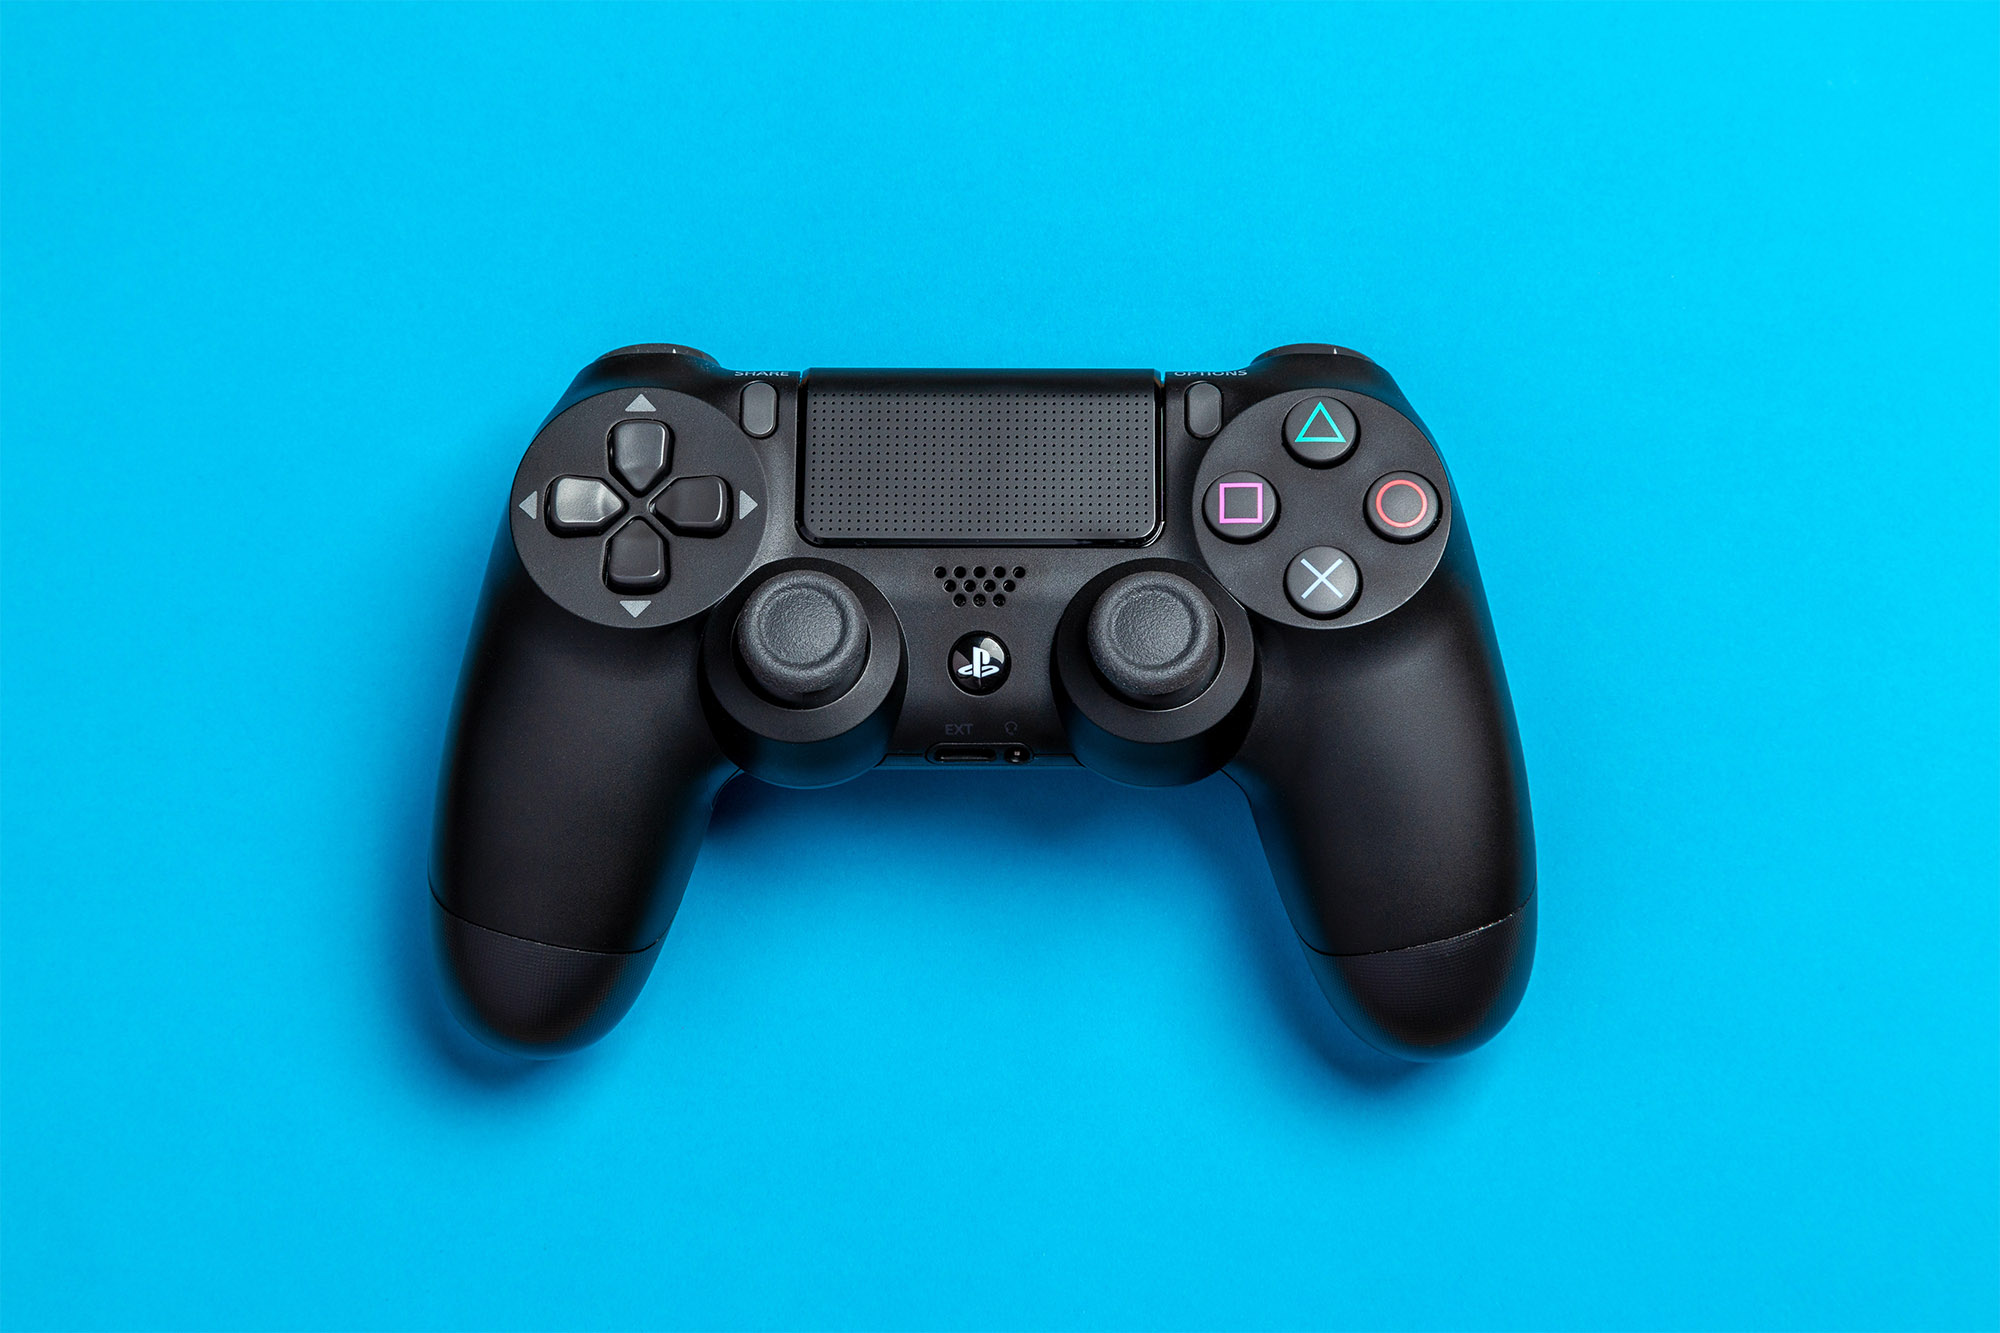 How to sync a PS4 controller